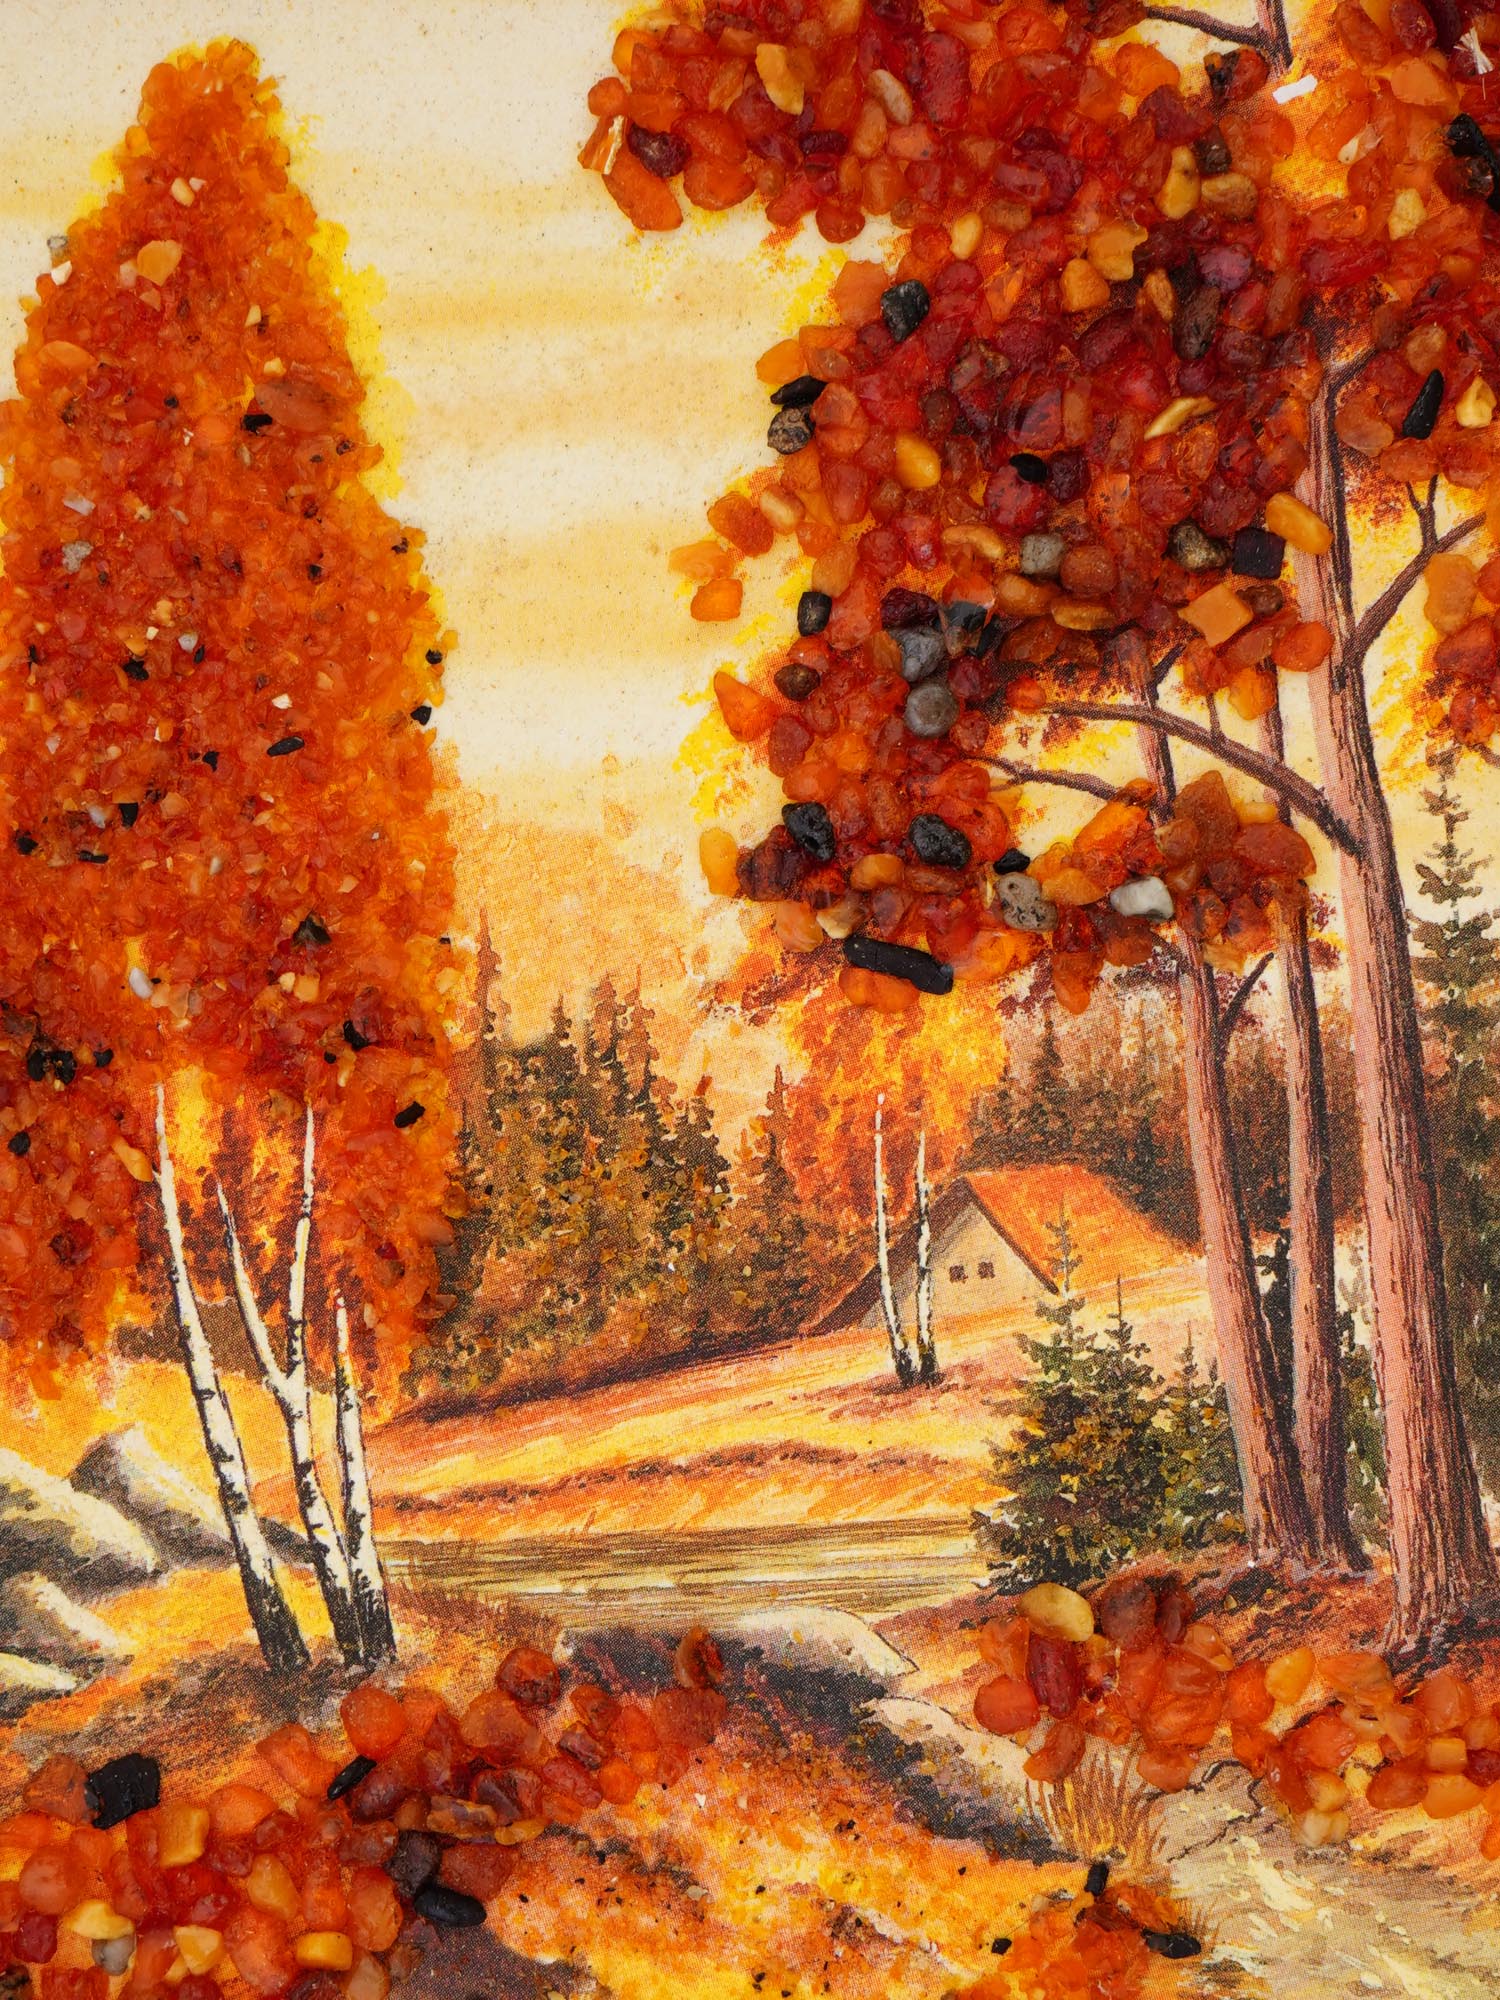 FRAMED AMBER AND SAND AUTUMN LANDSCAPE PAINTINGS PIC-5